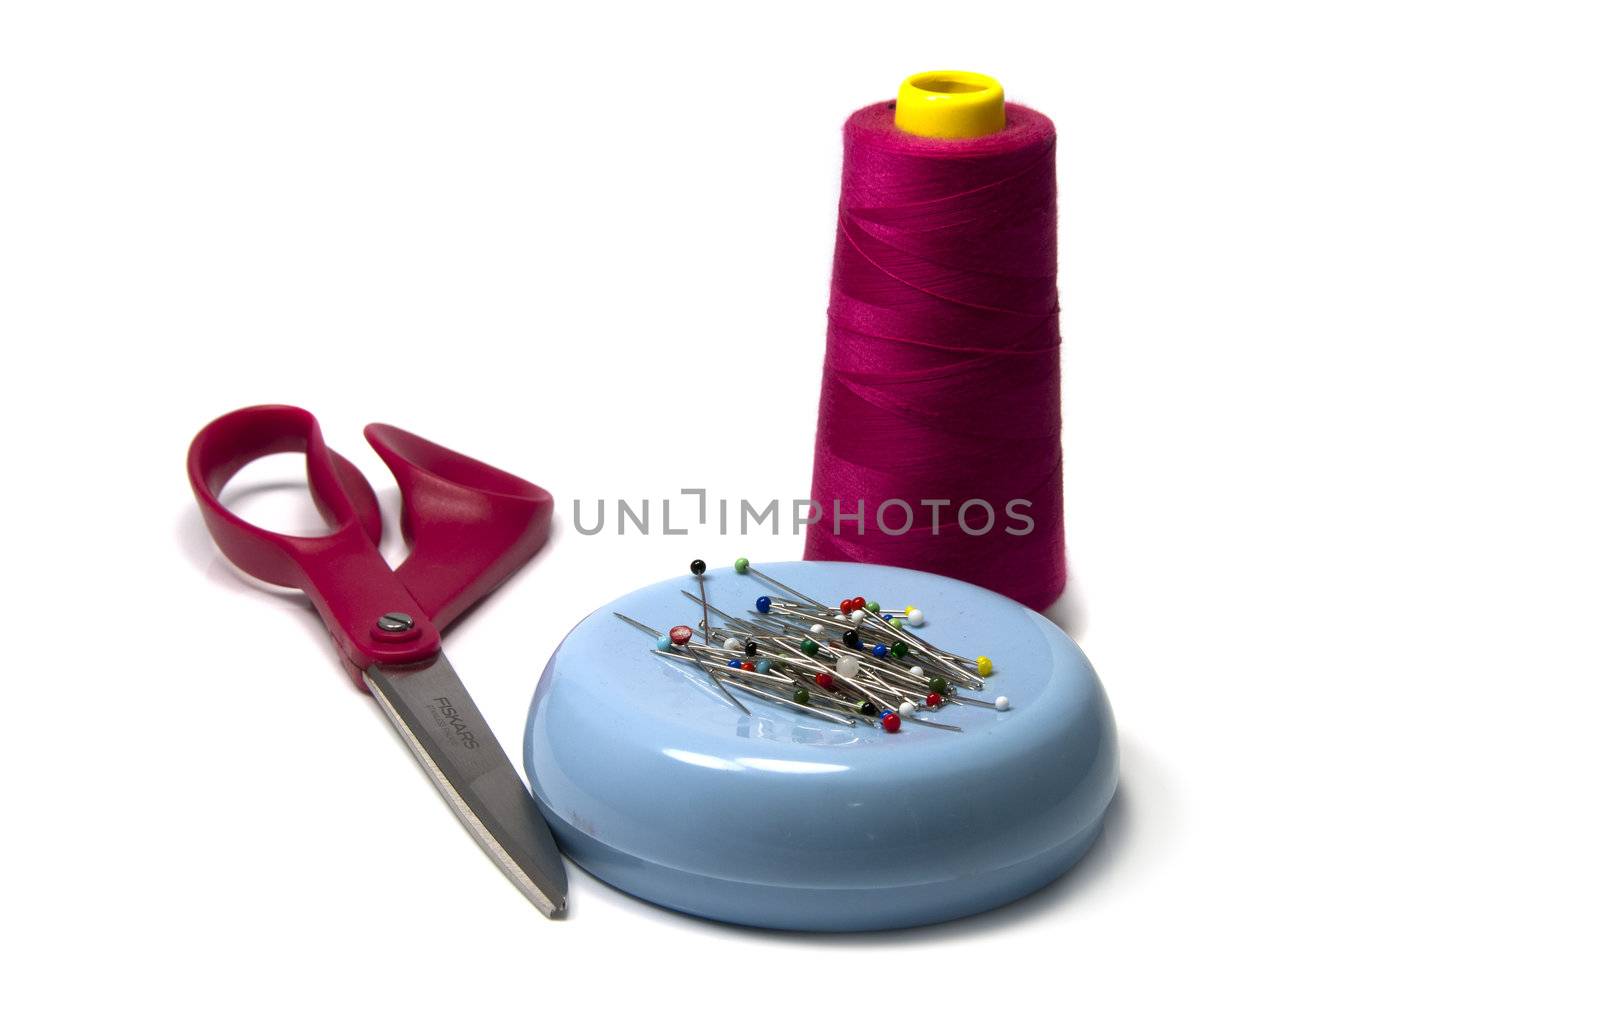 sewing material with siccors and needles by compuinfoto